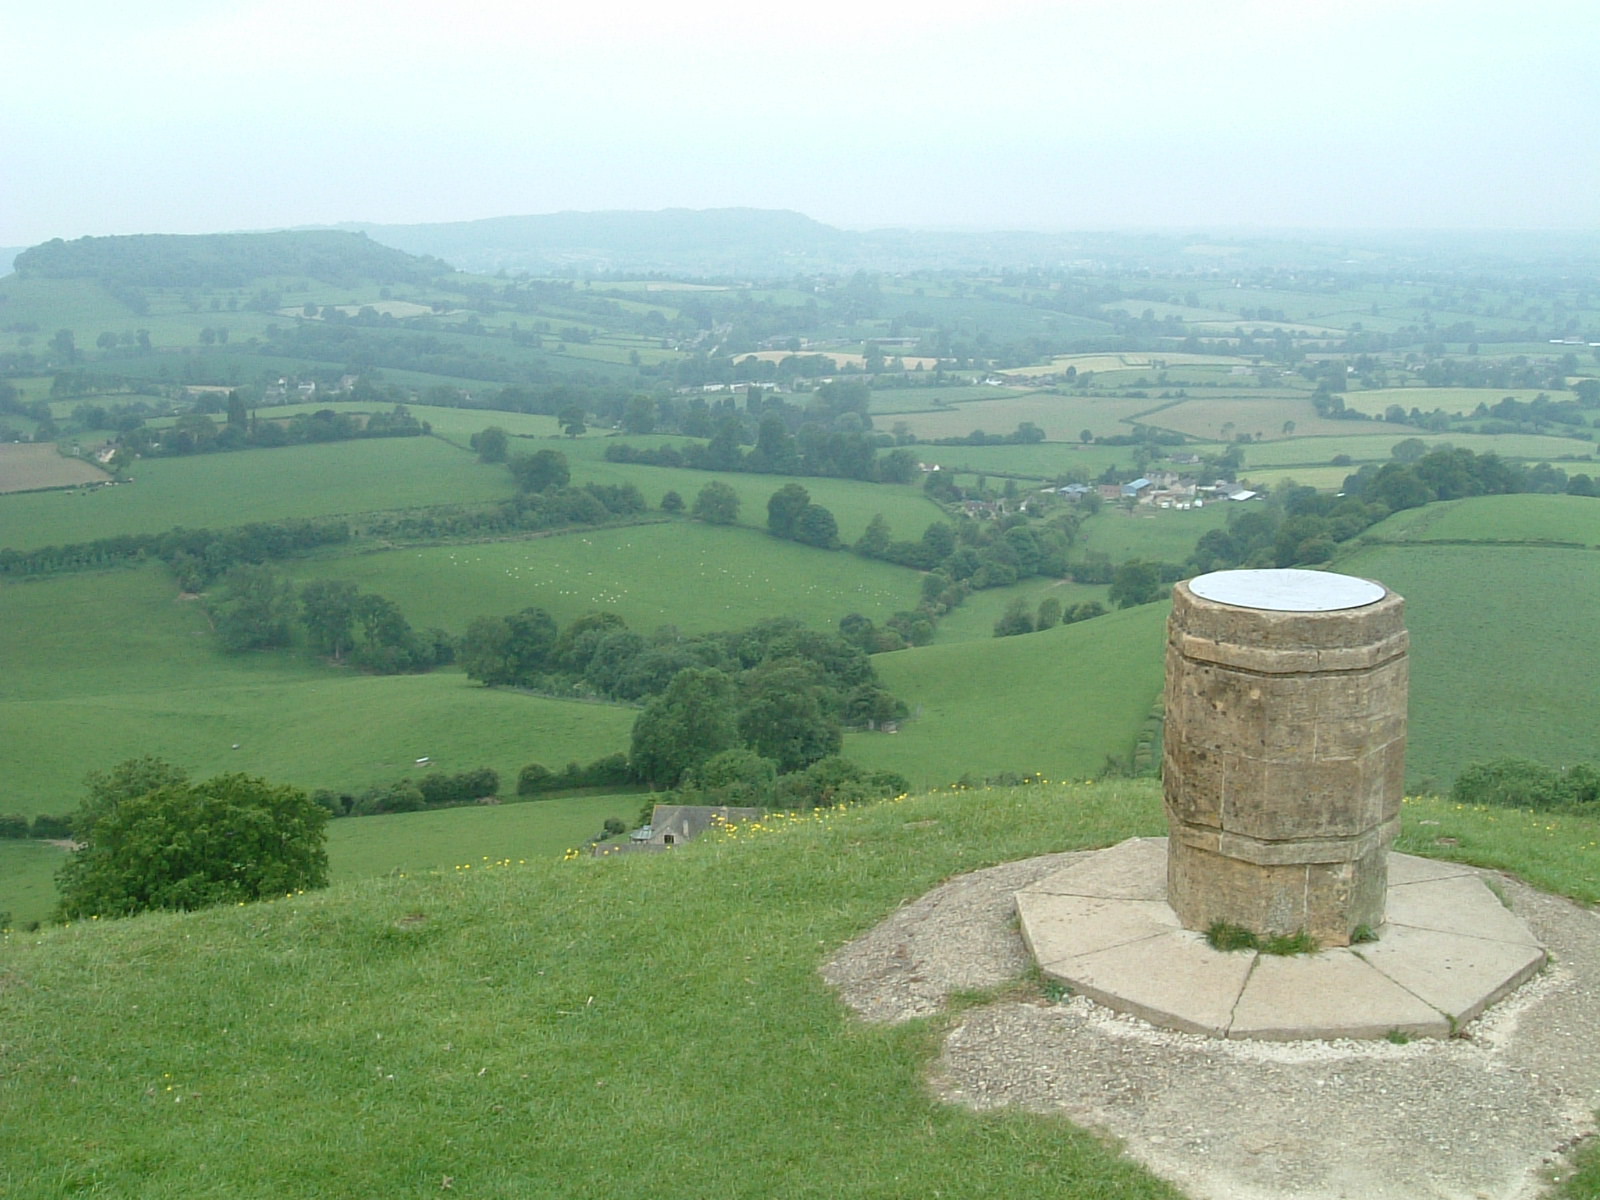 The viewpoint at Coaley Peak